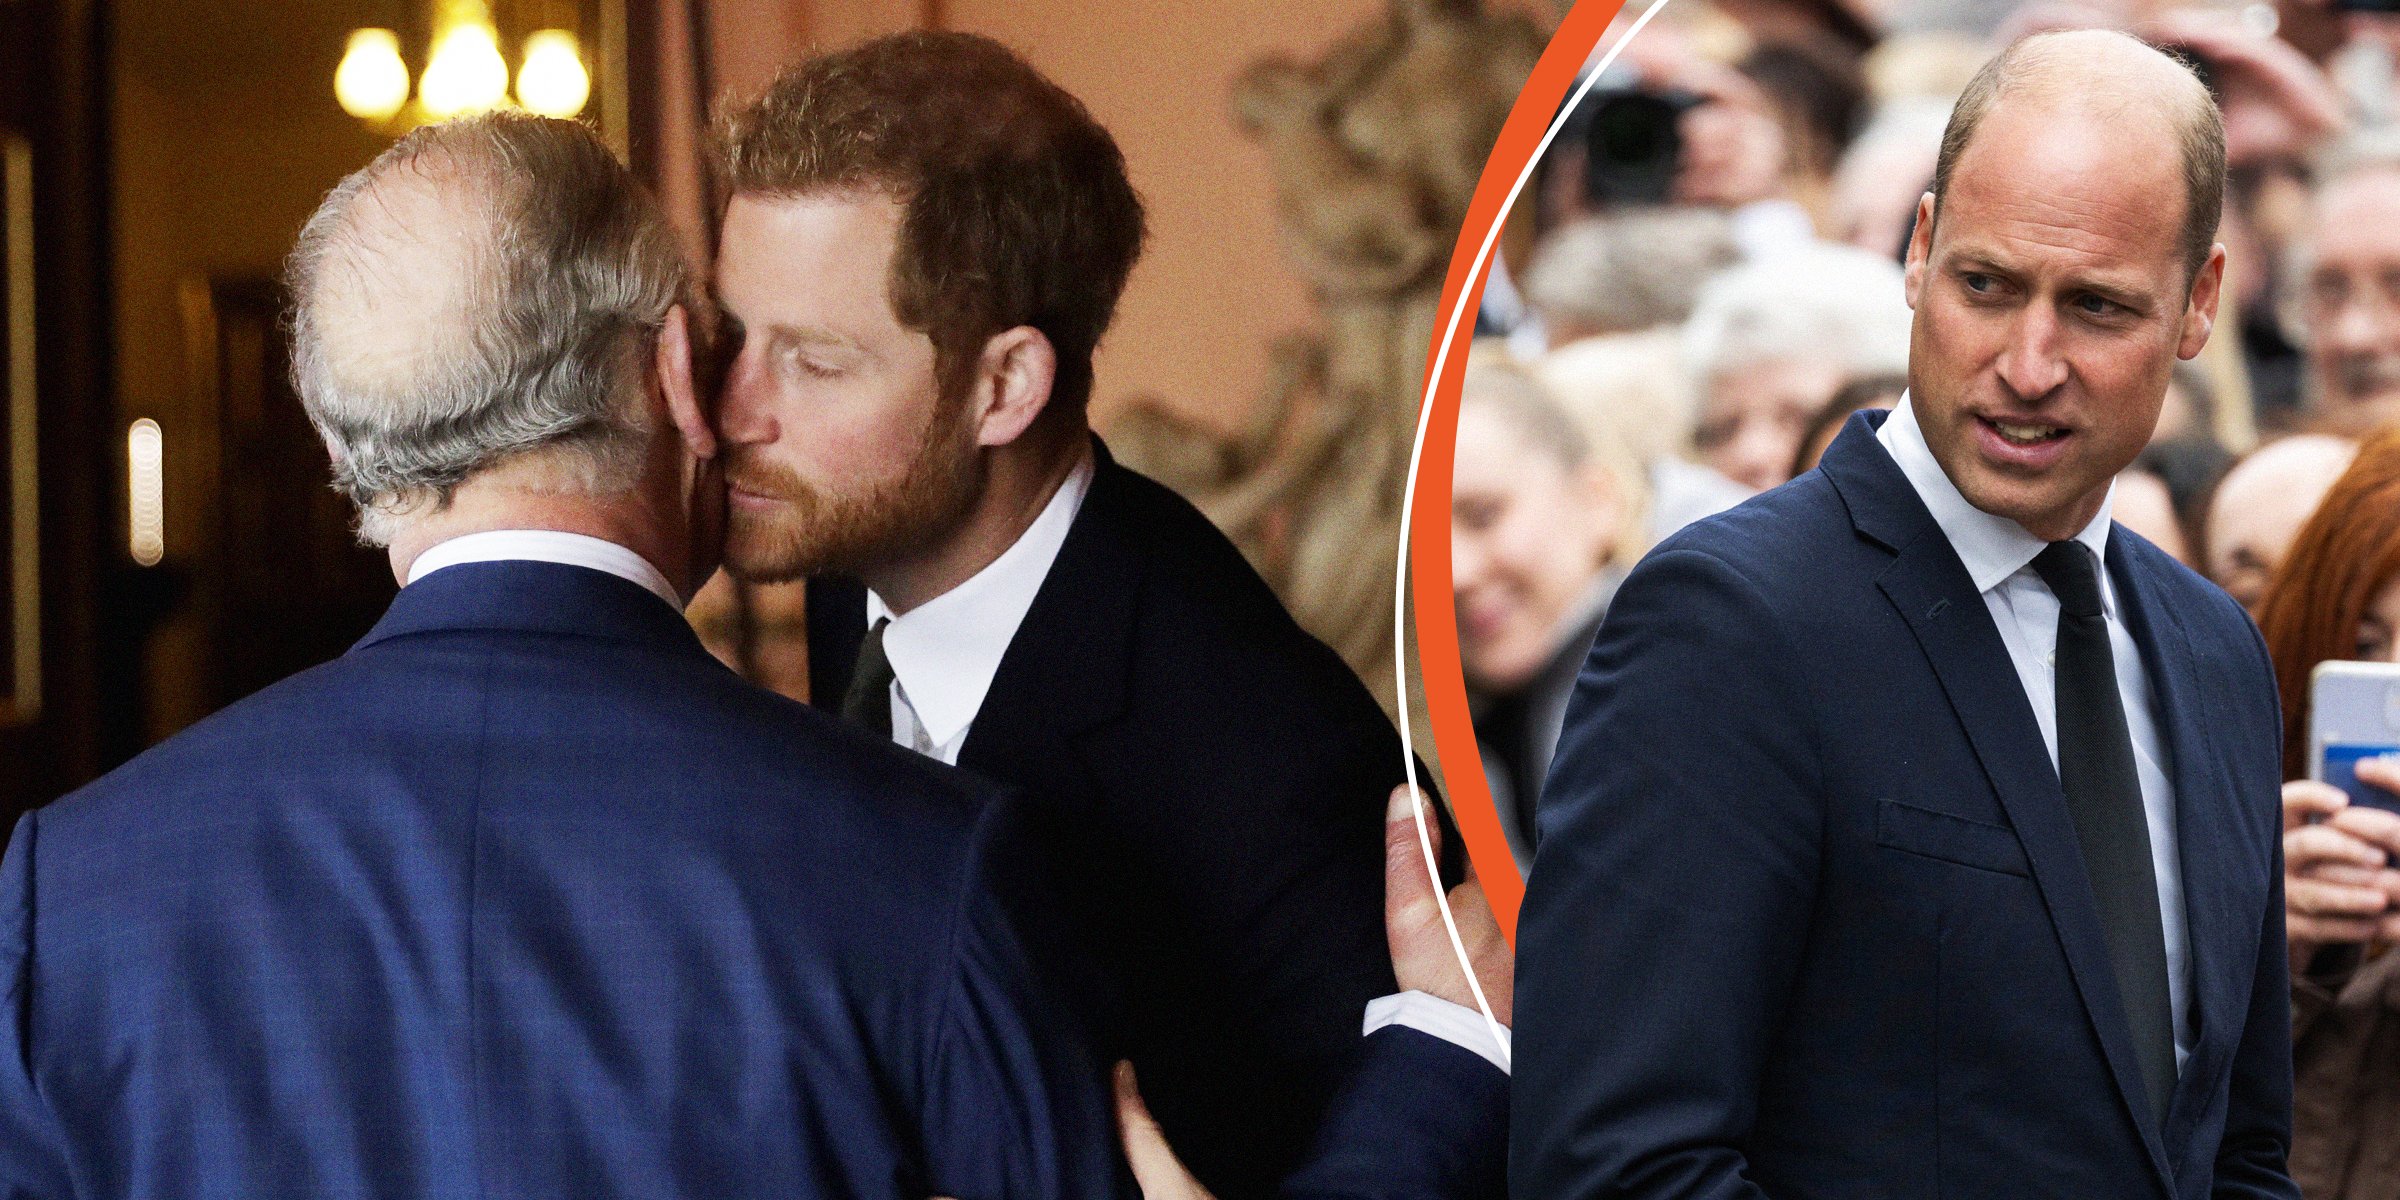 King Charles III and Prince Harry | Prince William | Source: Getty Images